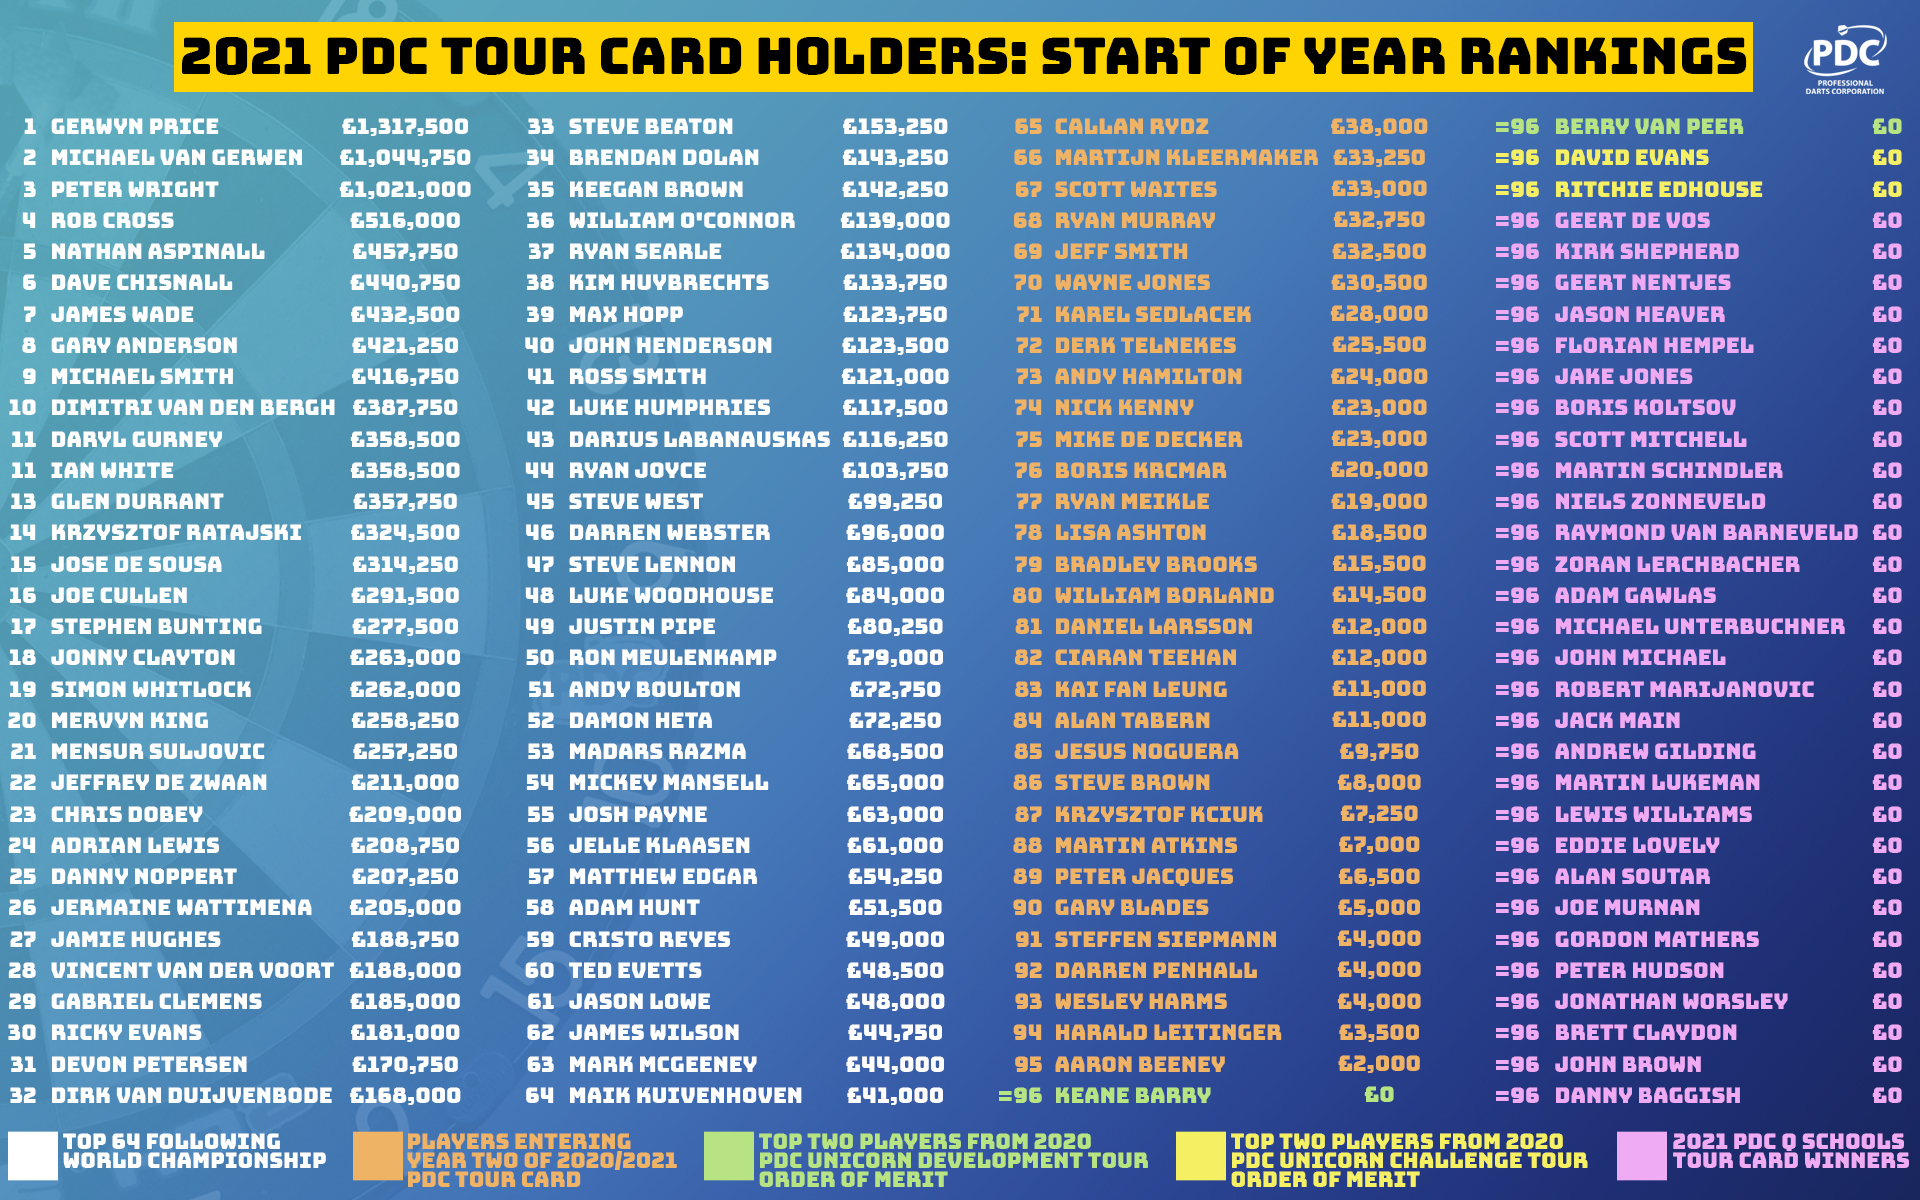 Sorg and Feje PDC Darts on Twitter: "🔢𝙍𝙖𝙣𝙠𝙞𝙣𝙜𝙨 𝙖𝙝𝙚𝙖𝙙 𝙤𝙛 𝙣𝙚𝙬  𝙨𝙚𝙖𝙨𝙤𝙣 We've listed all 128 PDC Tour Card Holders in current ranking  order ahead of Thursday's start of the 2021 season. Full story➡️  https://t.co/Otxz3vAgLQ